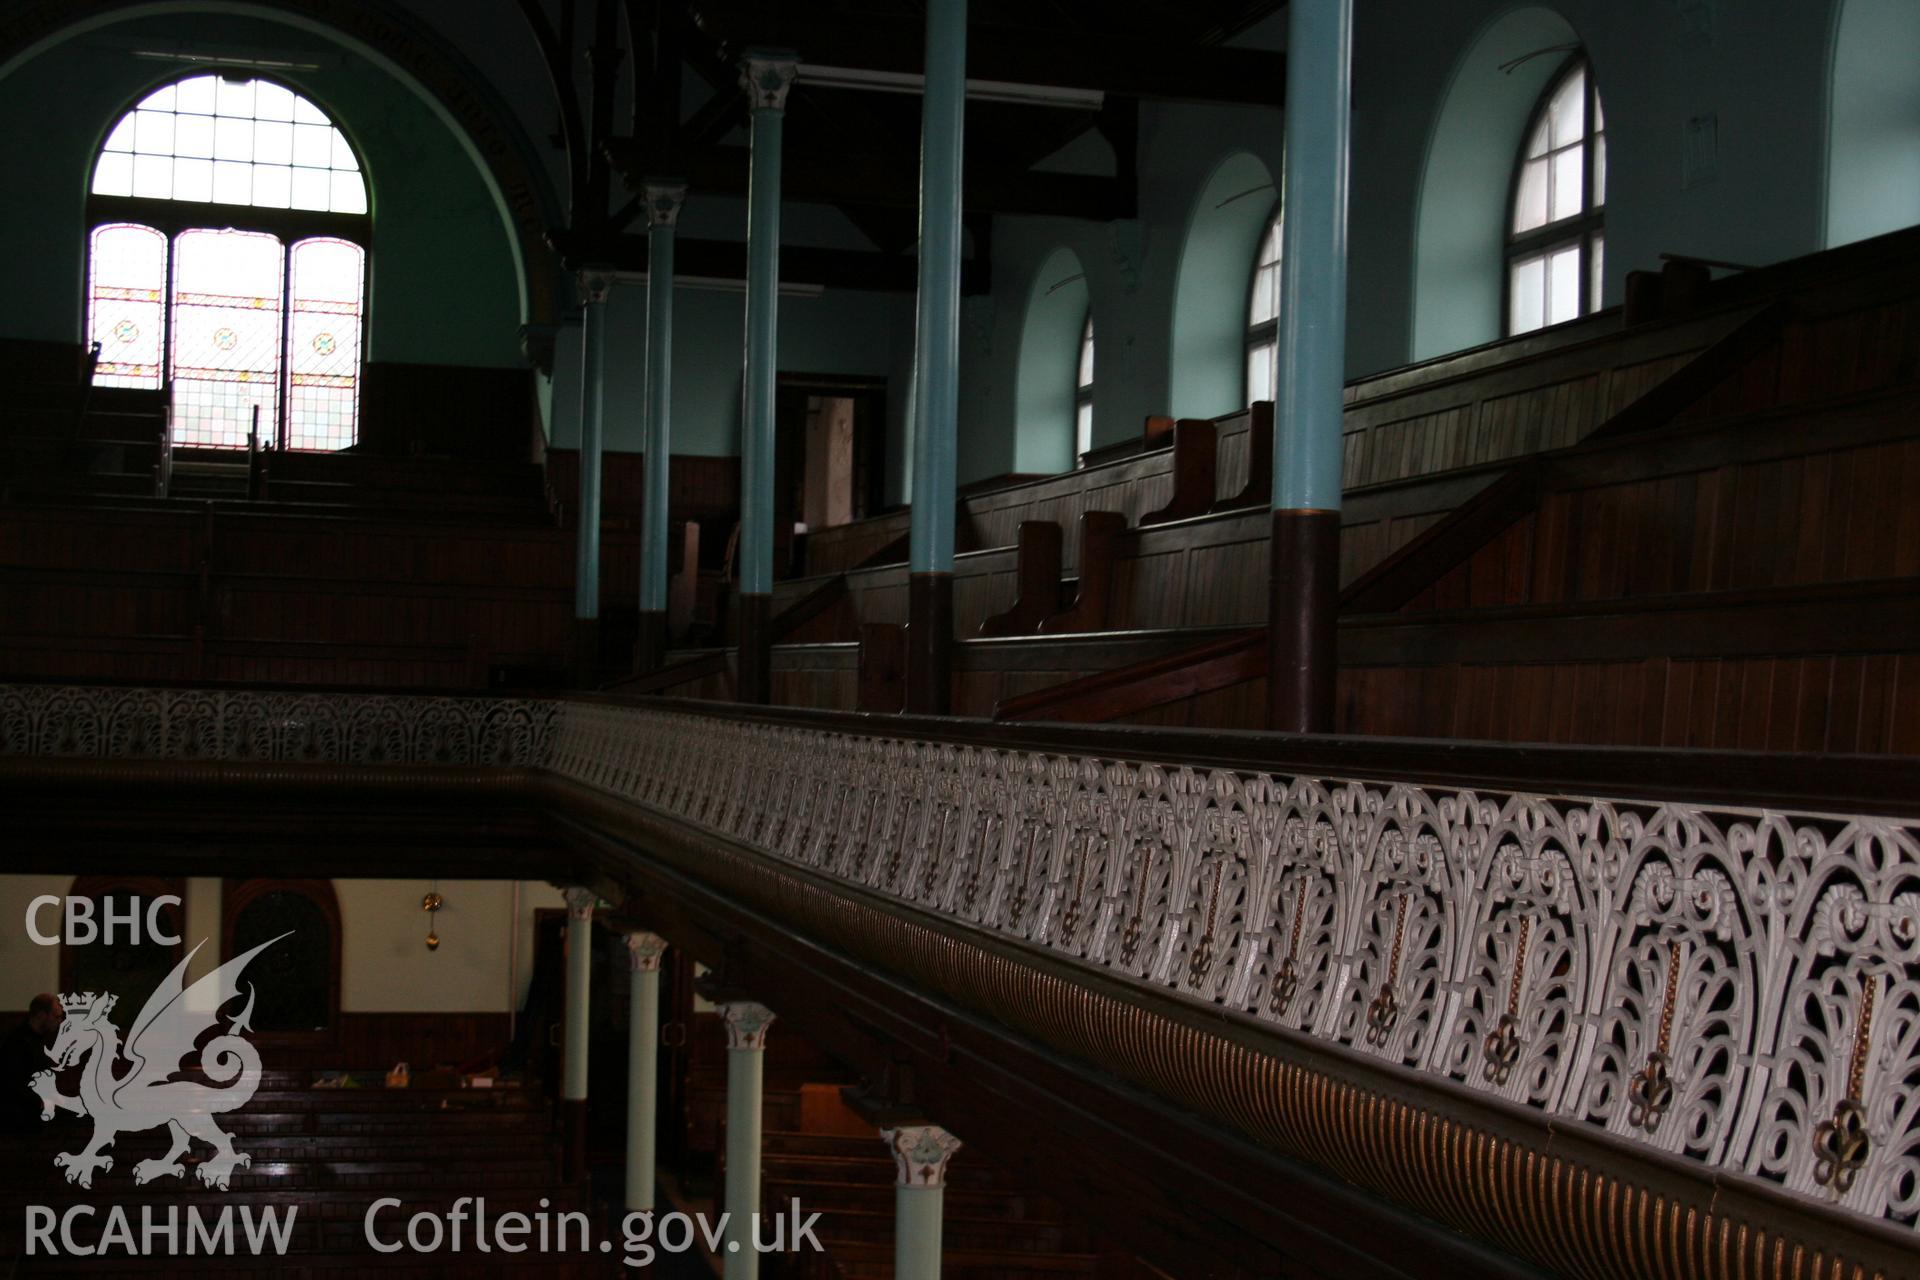 Hanbury Road baptist chapel, Bargoed, digital colour photograph showing interior - balcony, received in the course of Emergency Recording case ref no RCS2/1/2247.